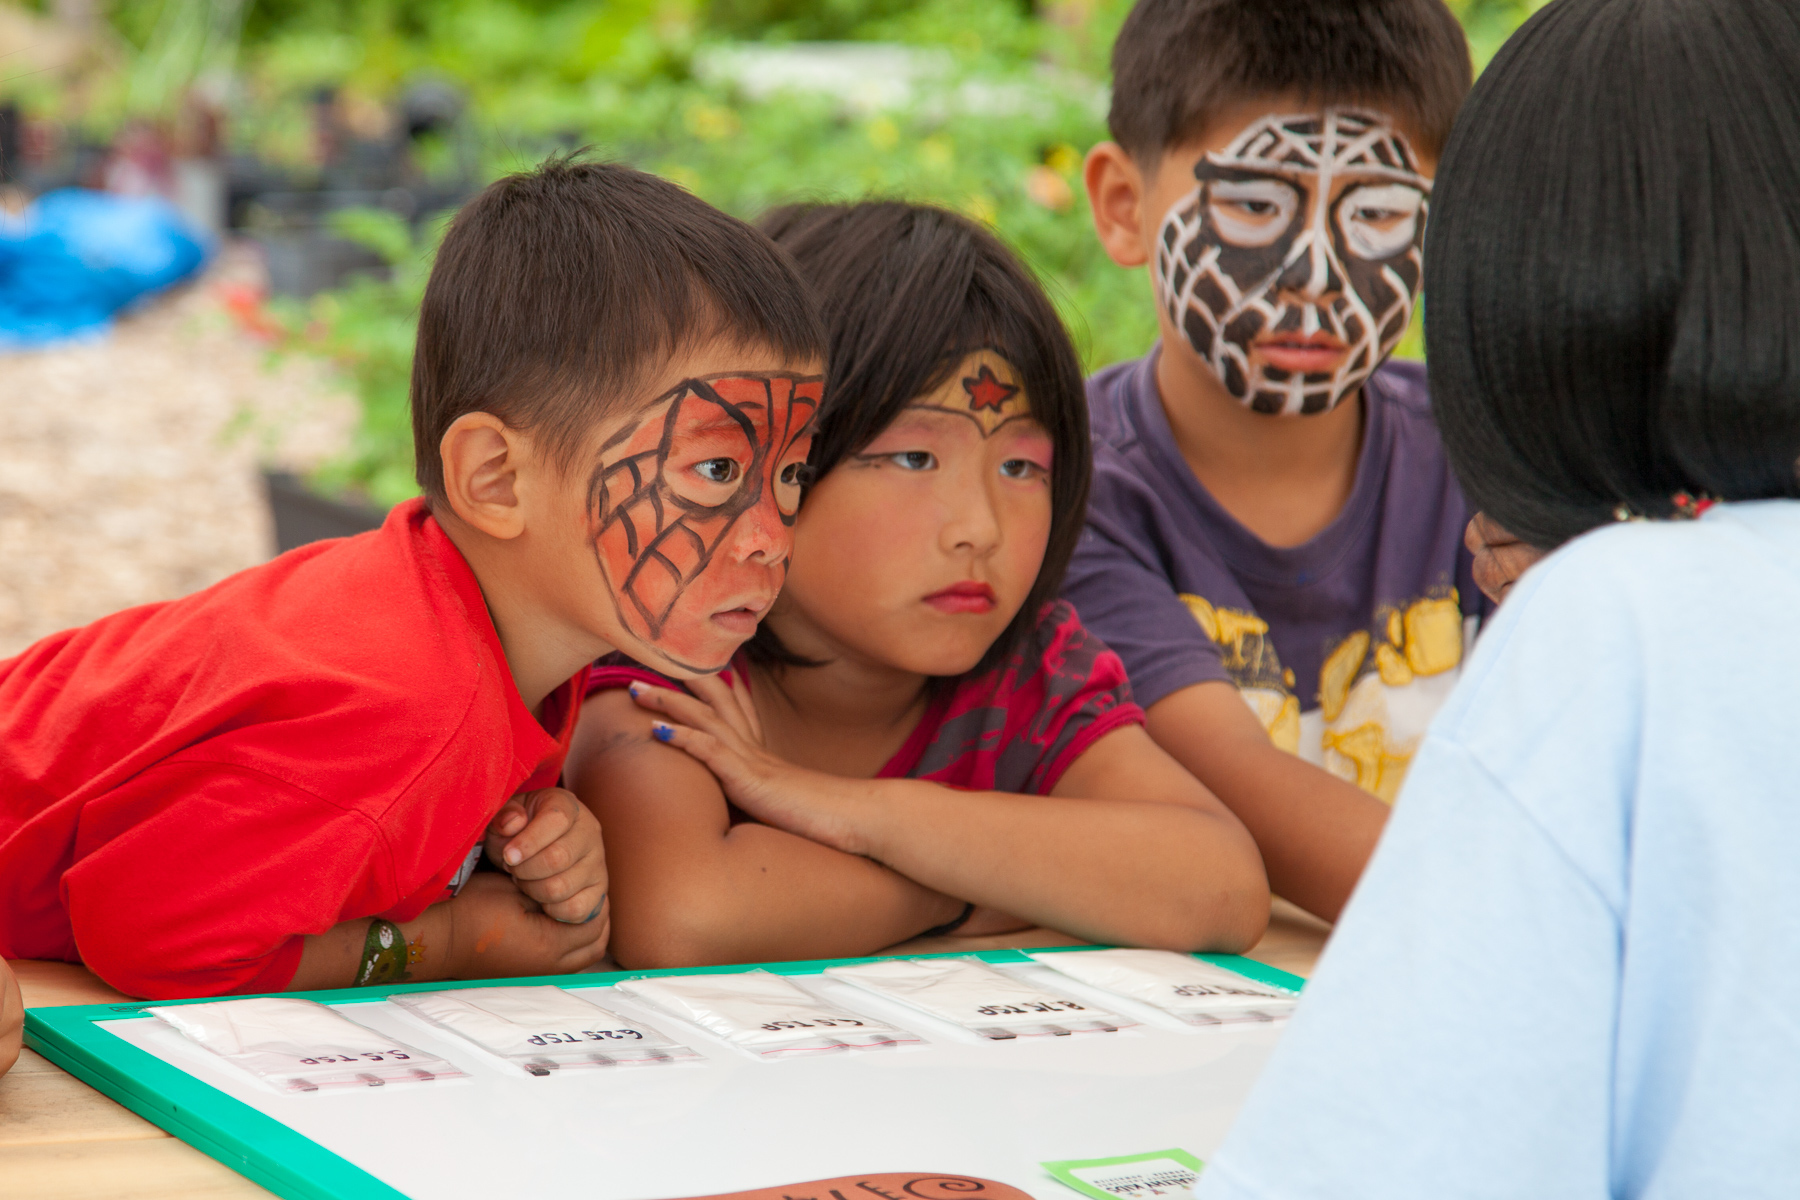 Kids with painted faces take part in an activity at the annual Black Creek Community Farm Festival.